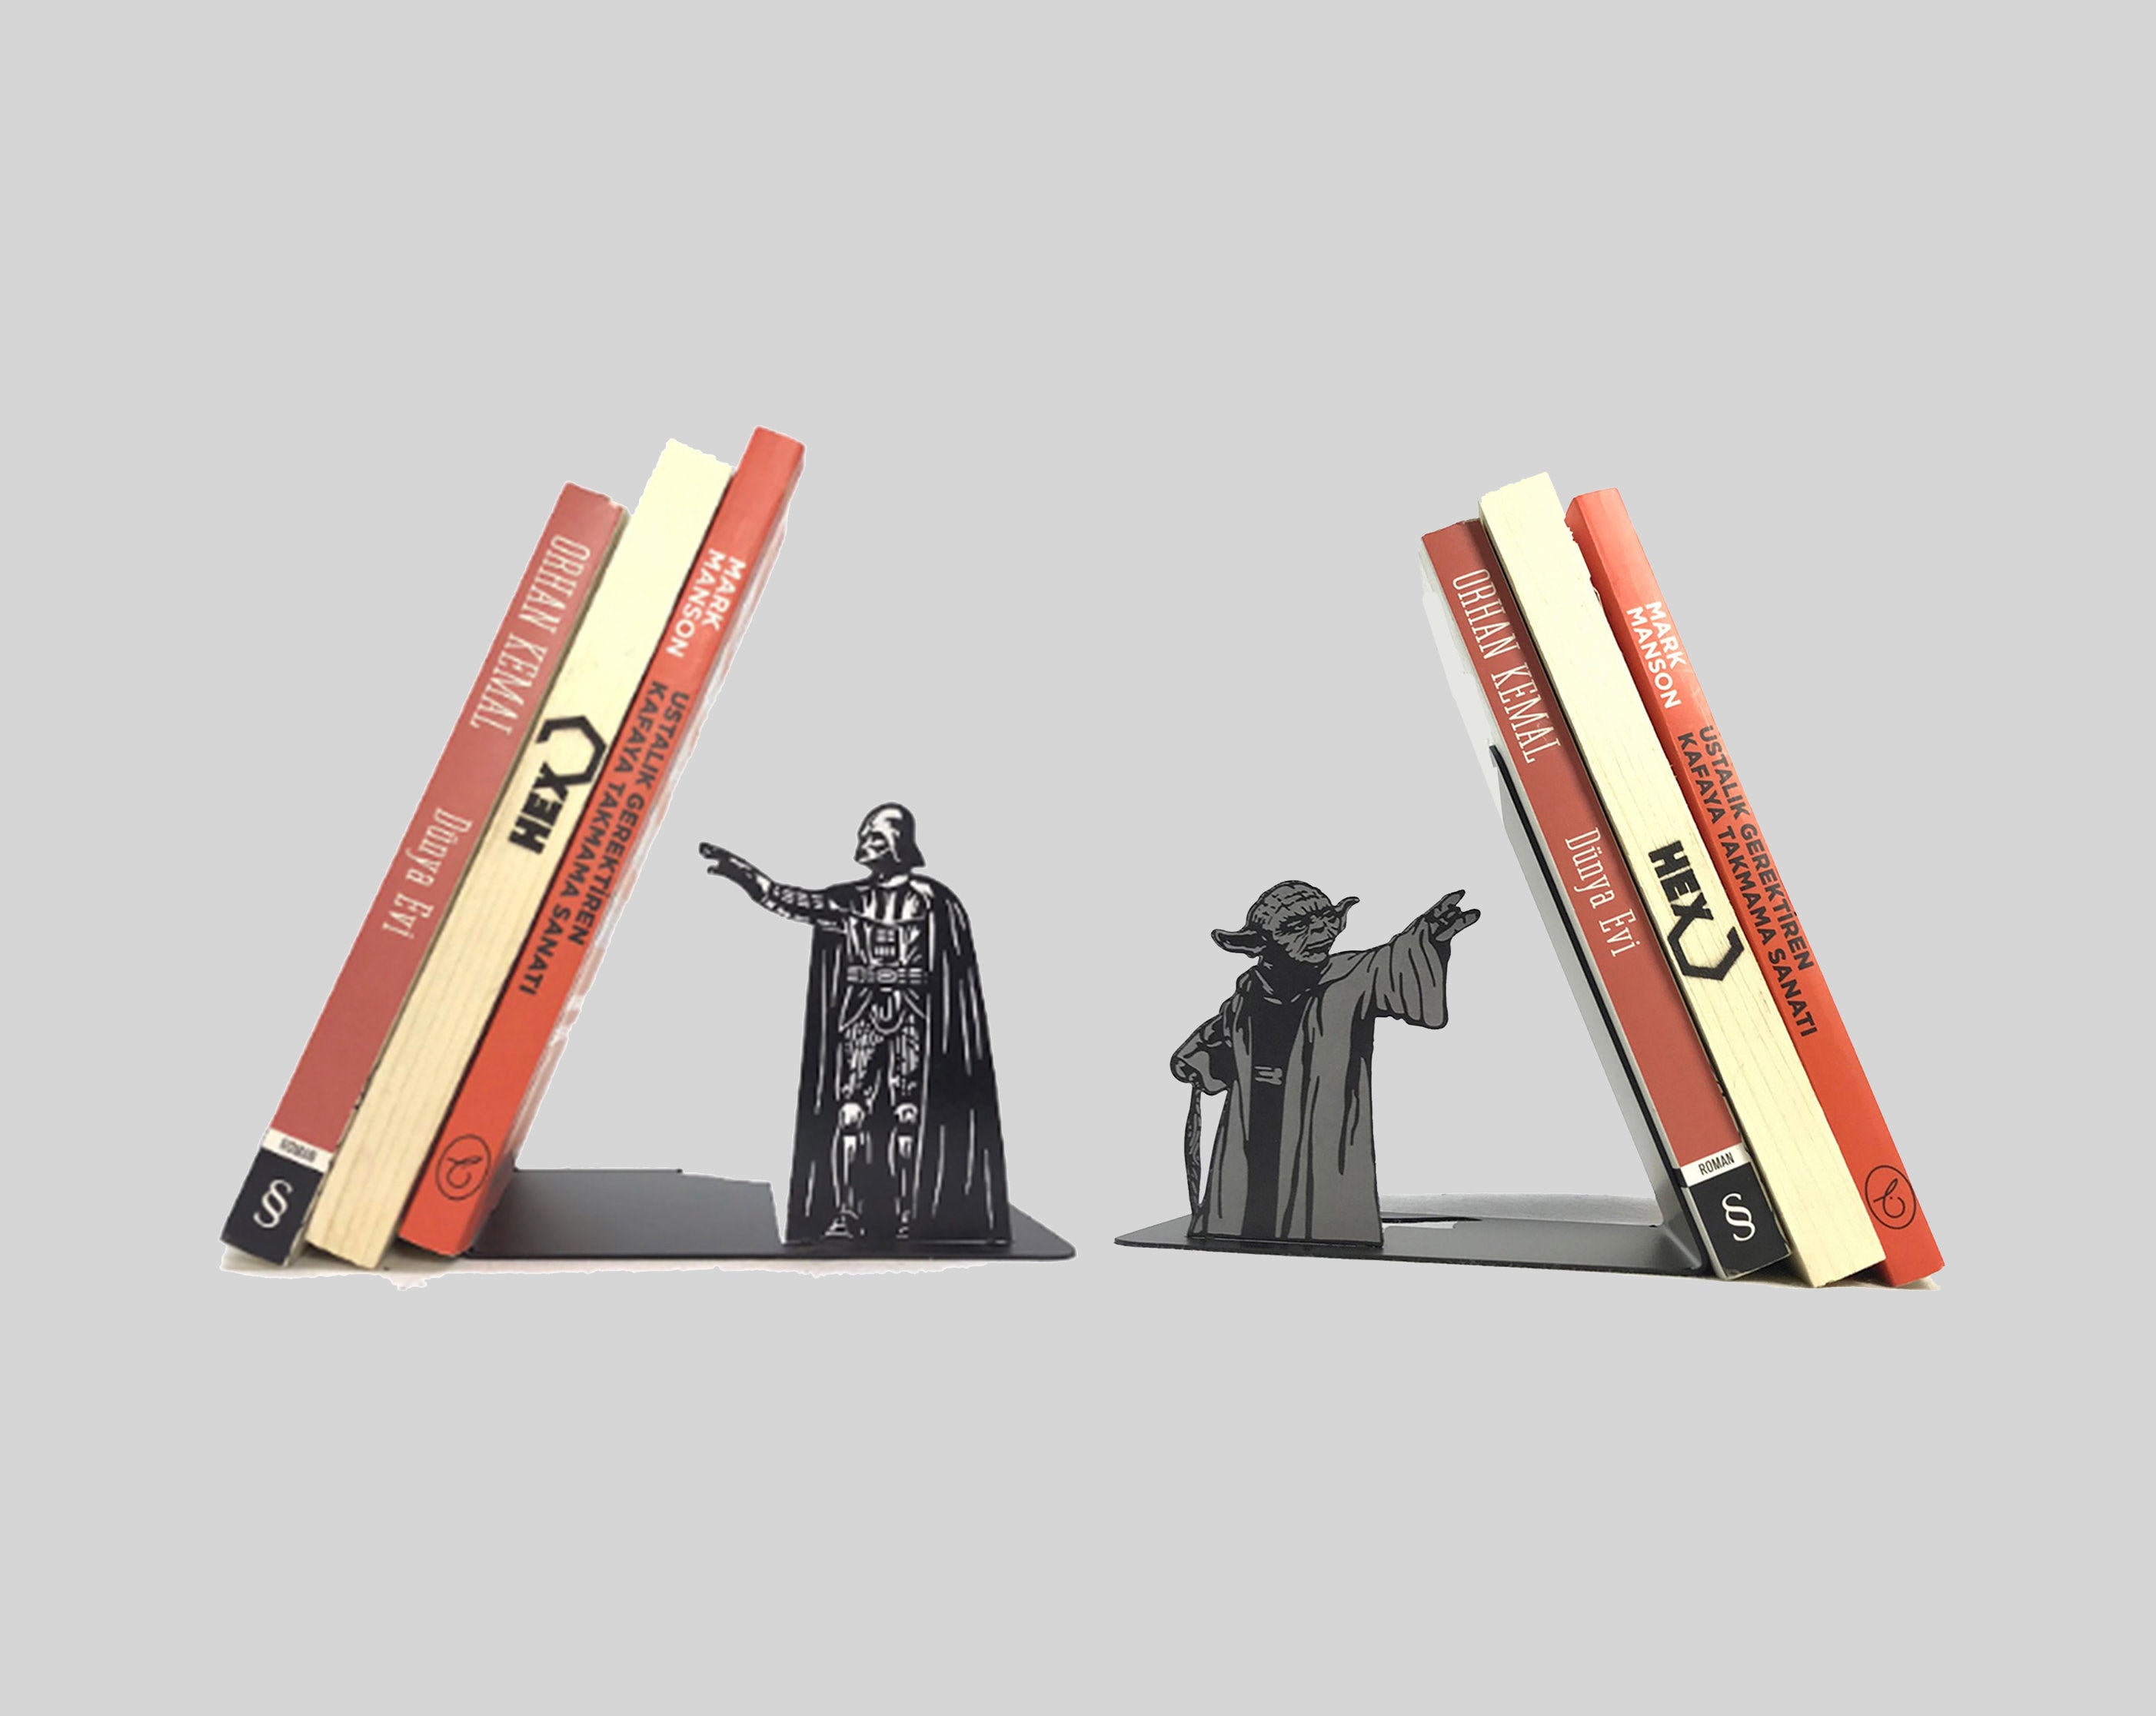 The 13 Best Geeky Bookends for Your Fantasy SciFi or Anime Bookshelf   whatNerd